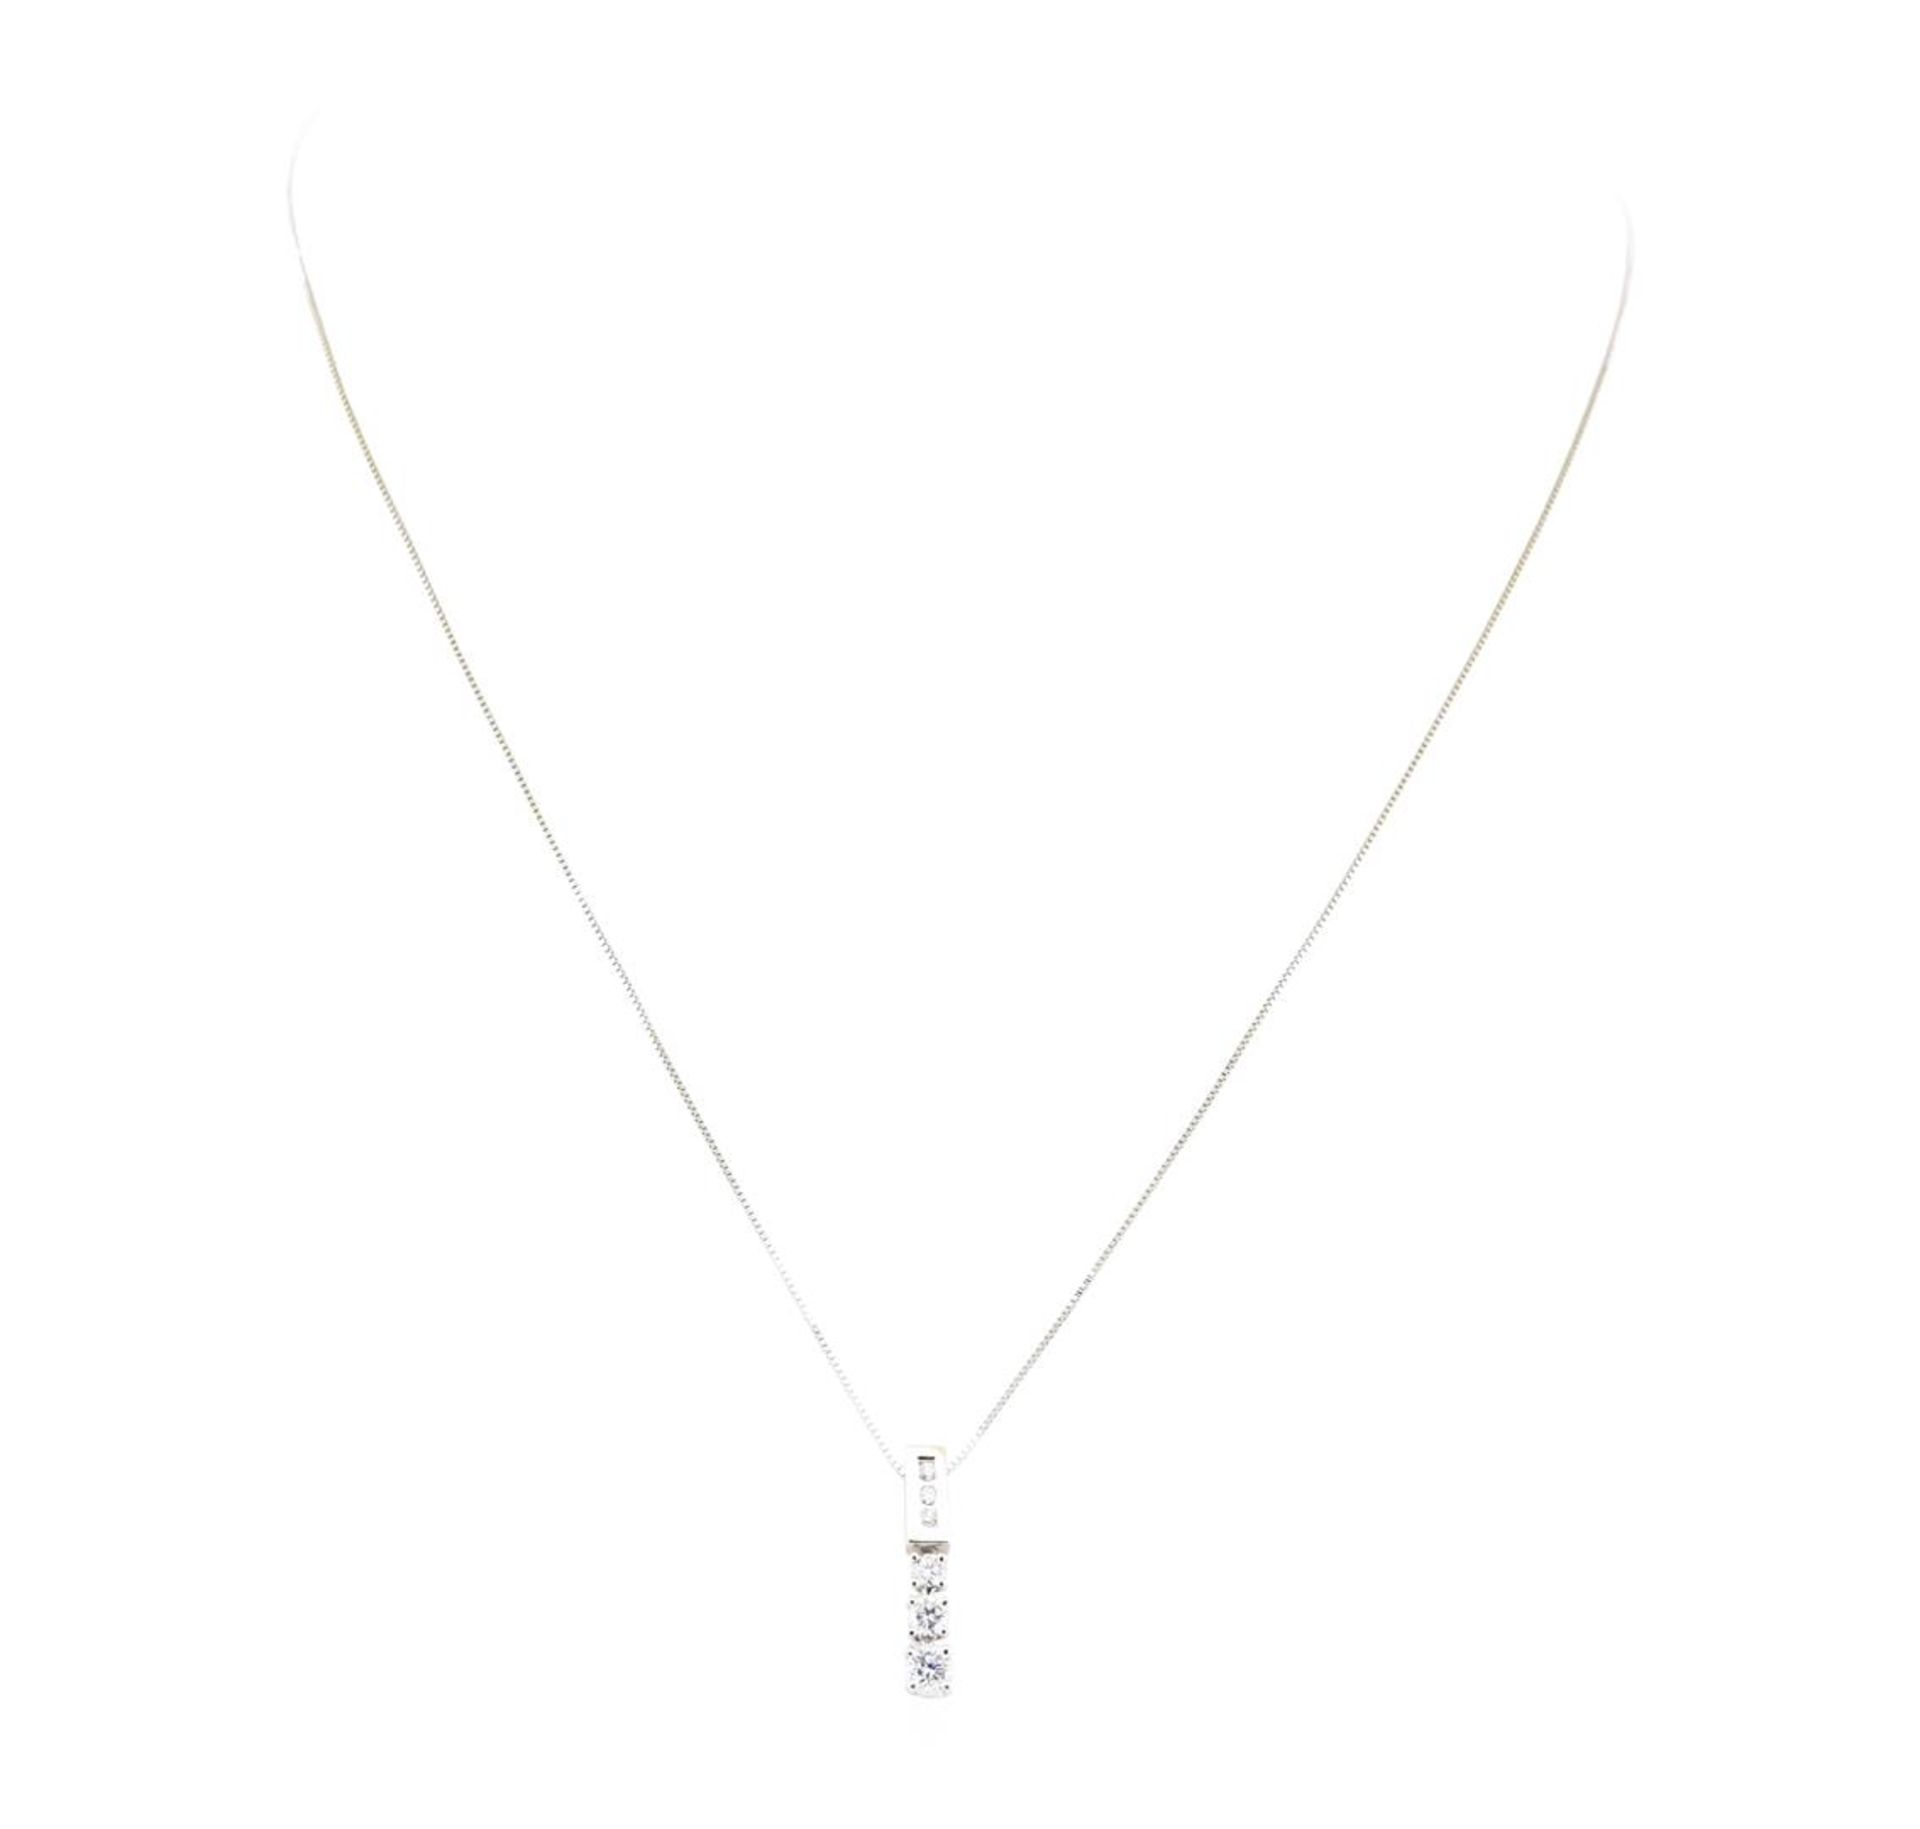 0.60ctw Diamond Straight Line Pendant with Chain - 14KT White Gold